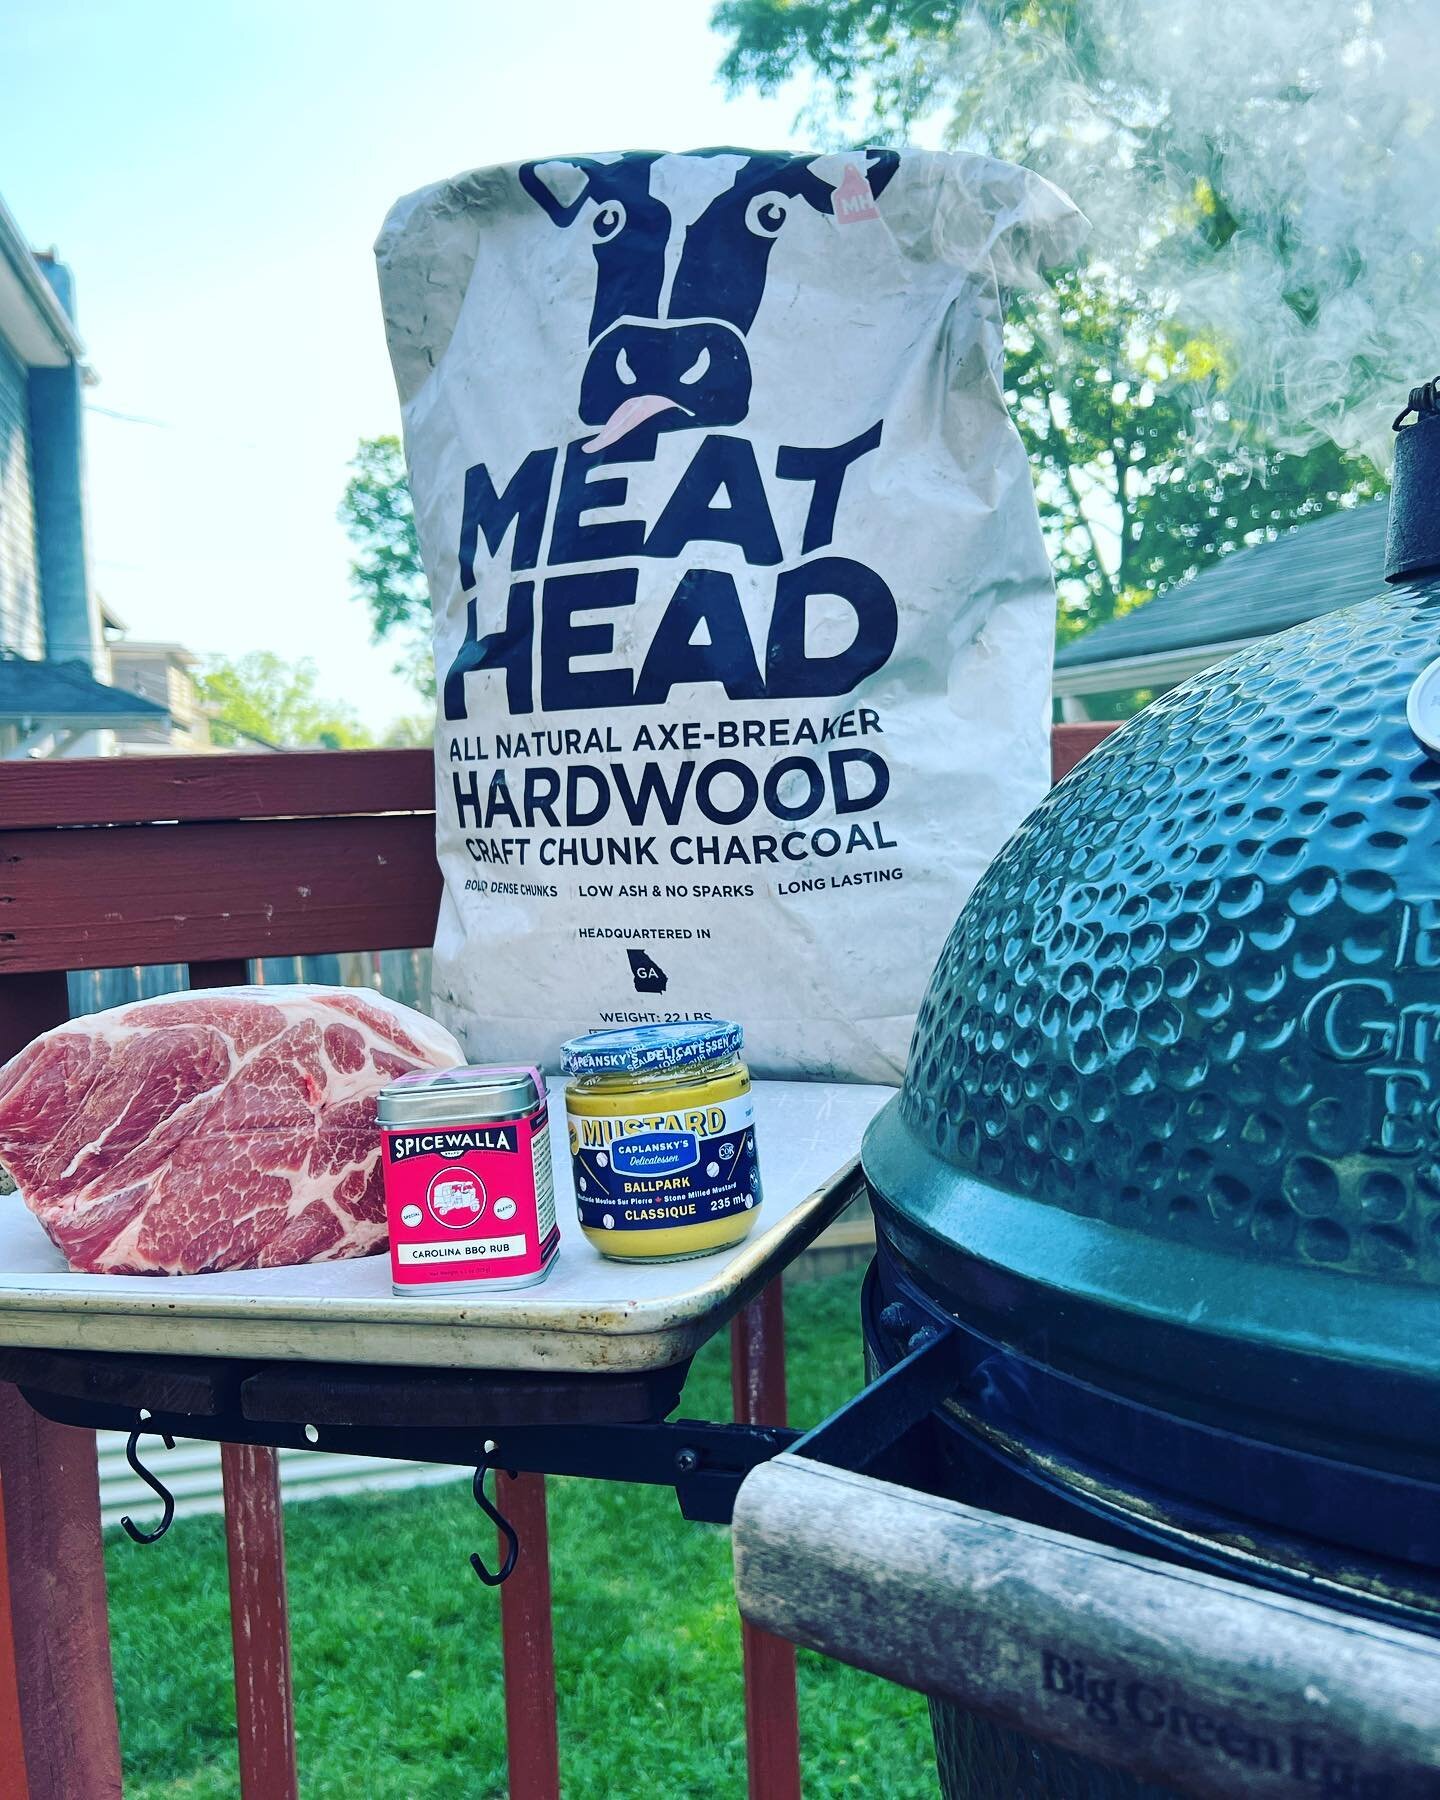 Let us help you make the most of today. 
We got all the fixins to make your BBQ dreams happen.
@autumn_olive_farms + @meatheadcharcoal + @spicewalla + @themustardparty = Sunday BBQ.
.
#ybm #bbqrke #eatroanoke #caplanskysmustard #meatheadcharcoal #aut